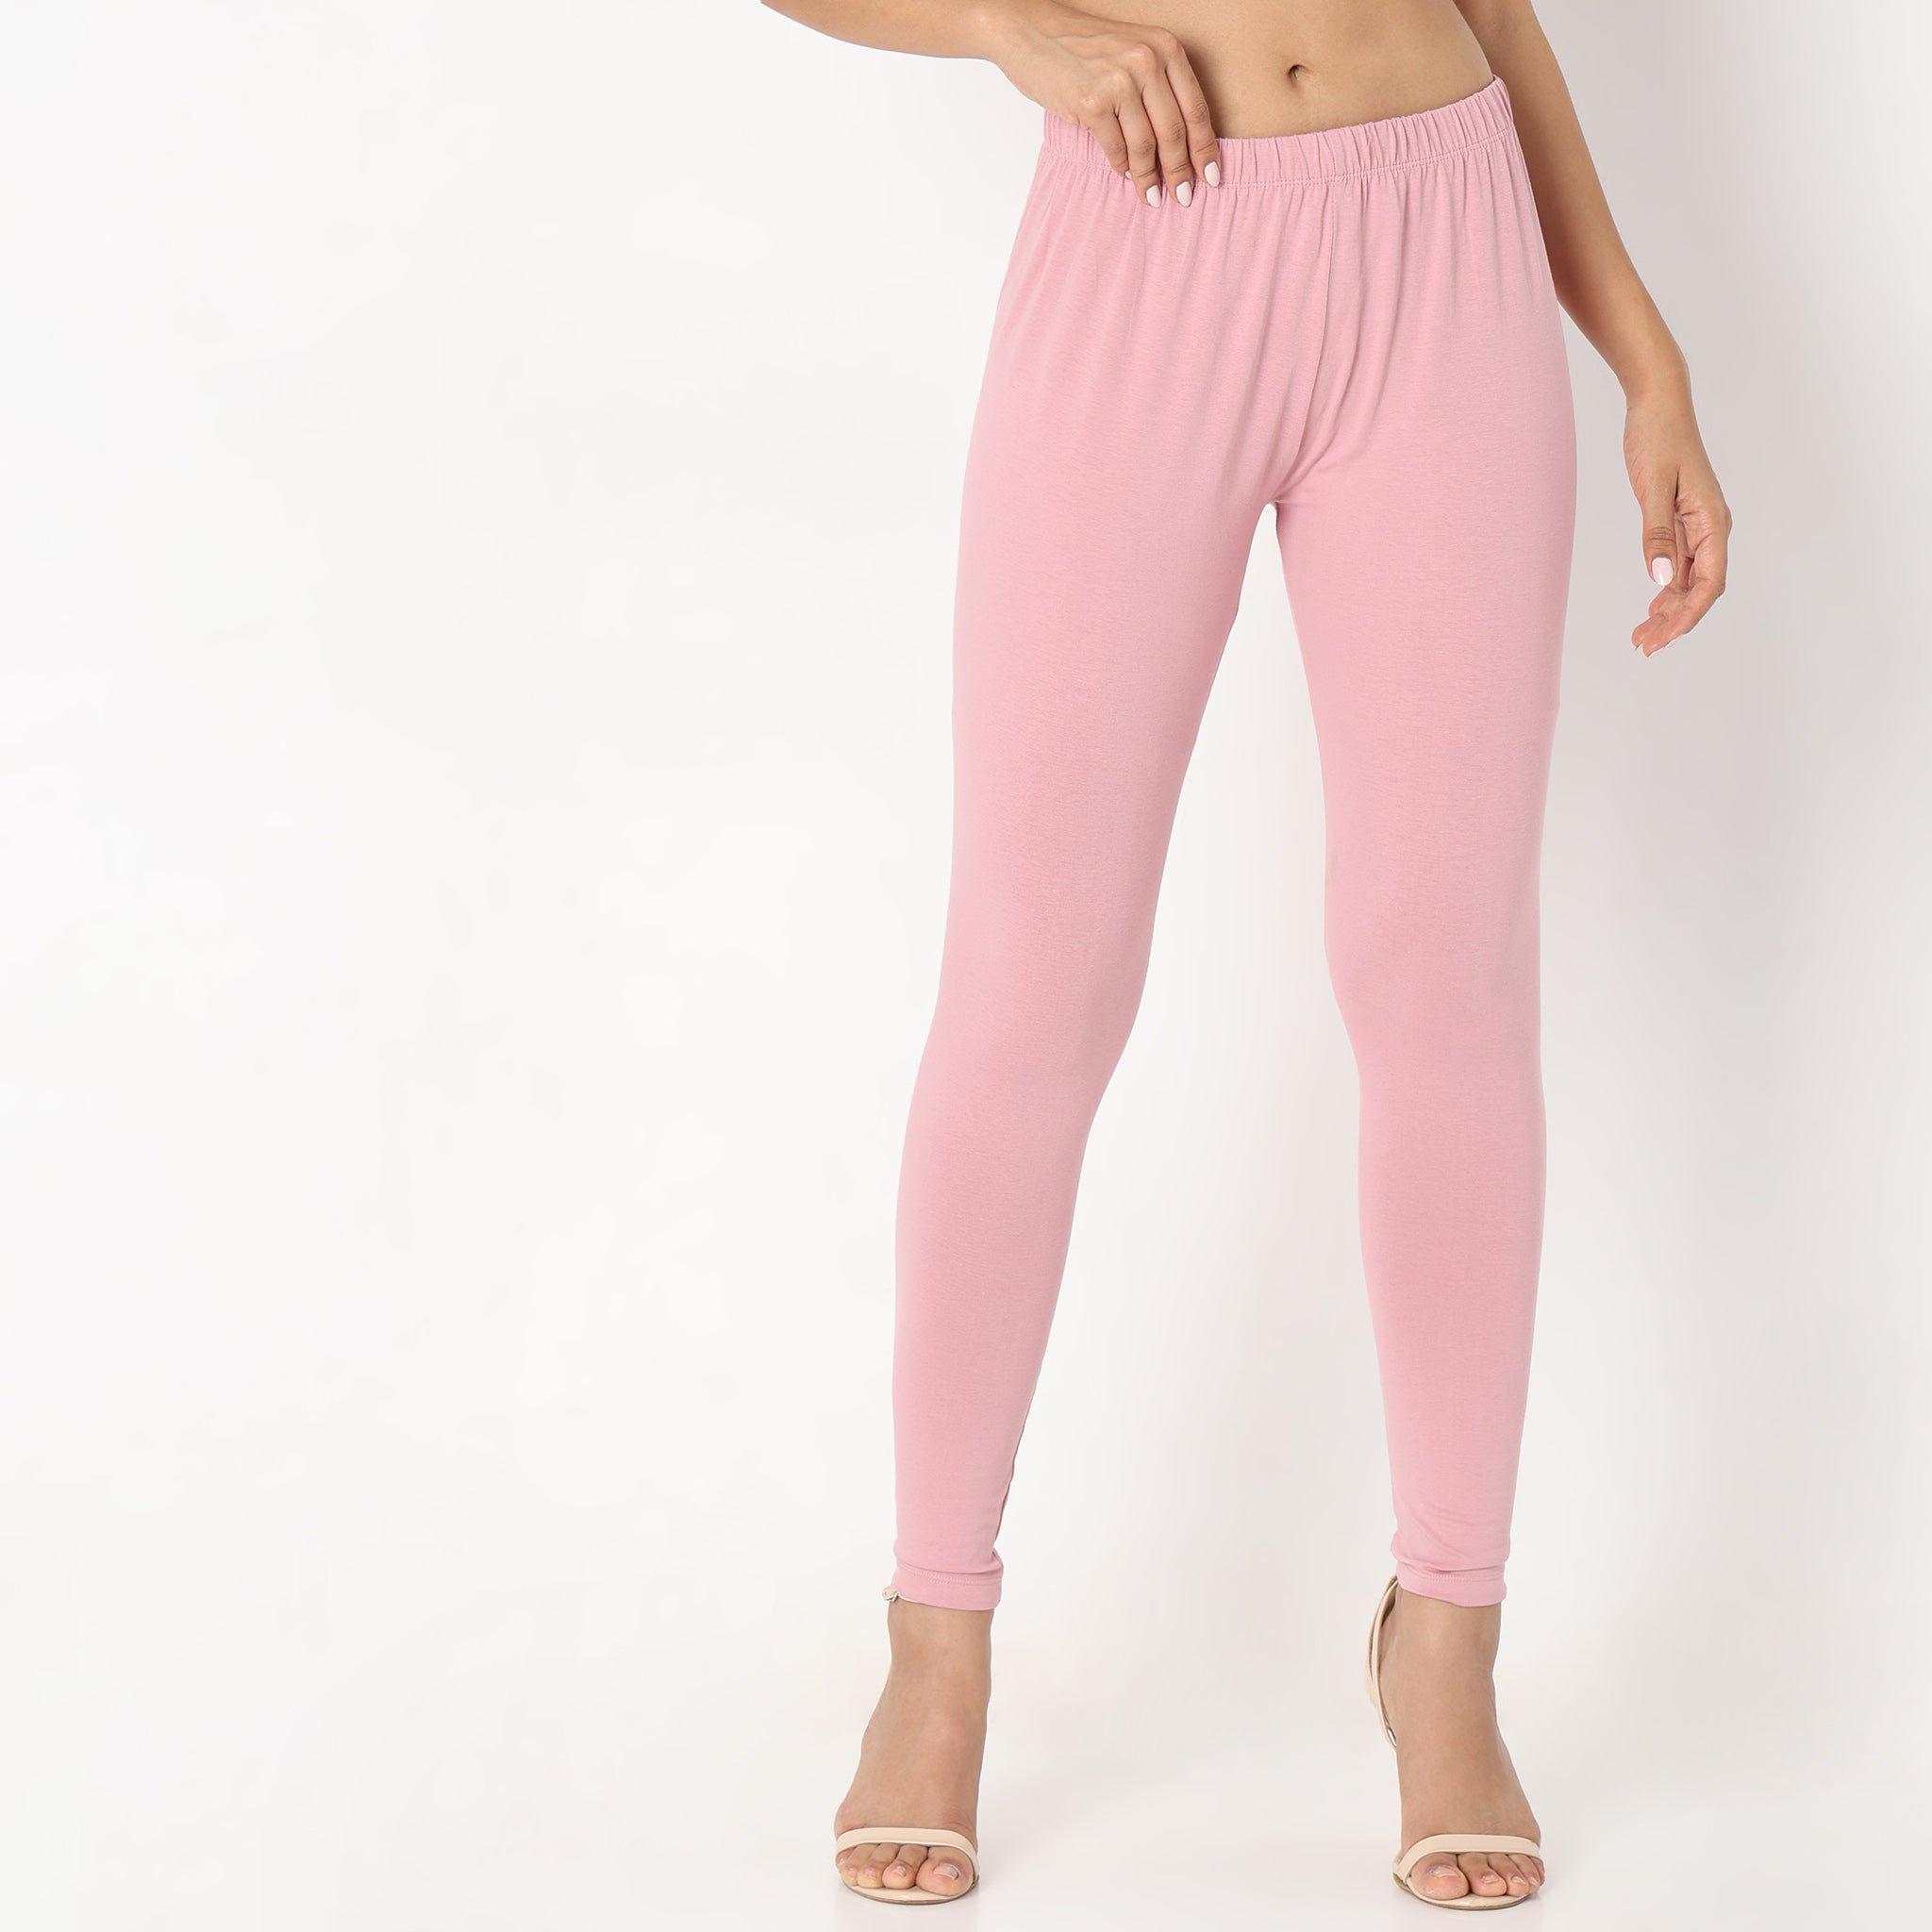 Shop Plain Mid-Rise Seamless Leggings with Elasticated Waistband Online